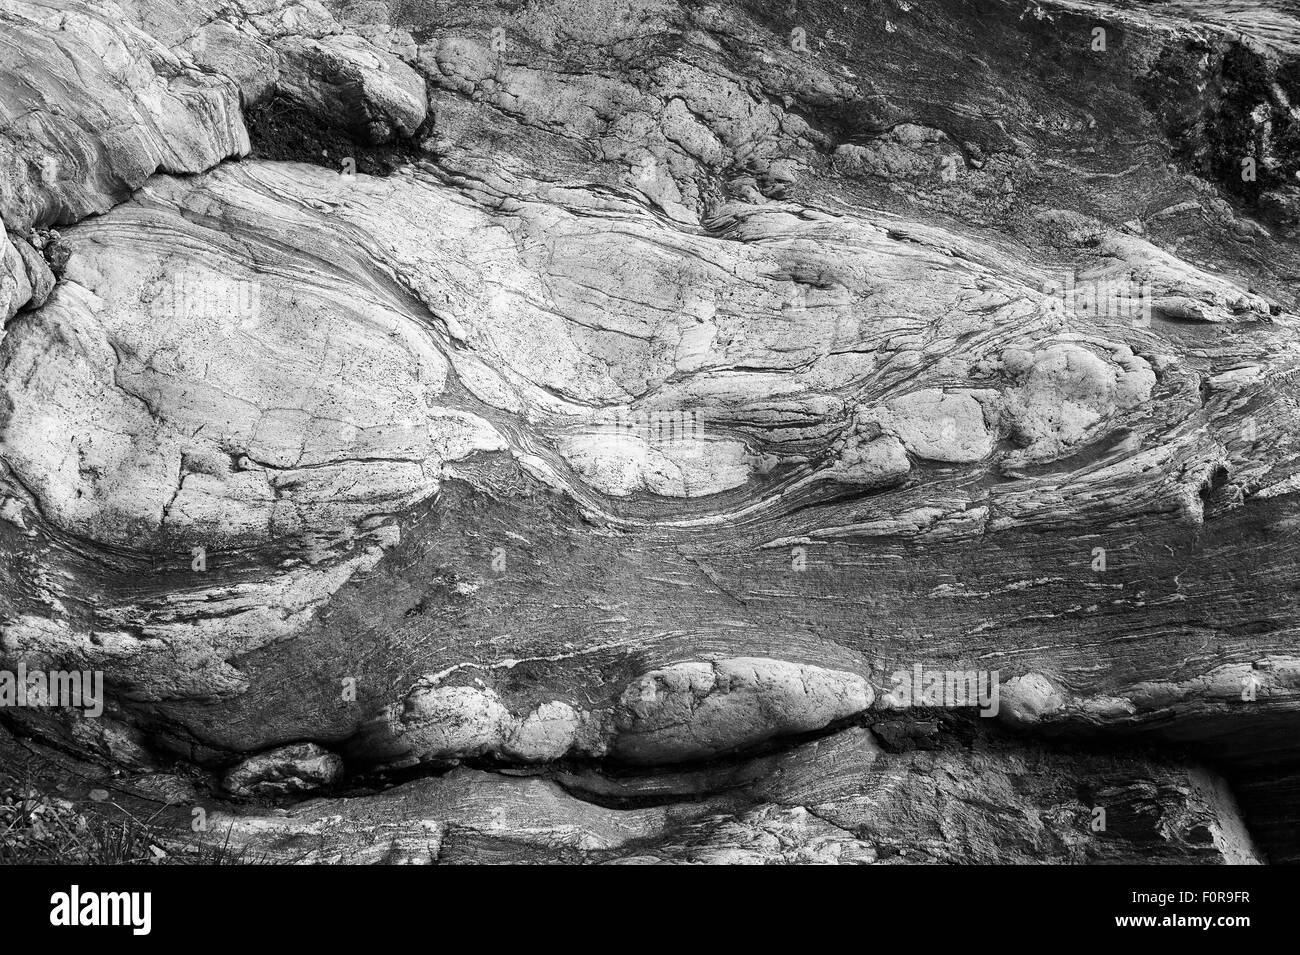 Metamorphic Rock Structures in Geological Outcrops below the Briksdalsbreen Glacier, Olden, Norway. Stock Photo